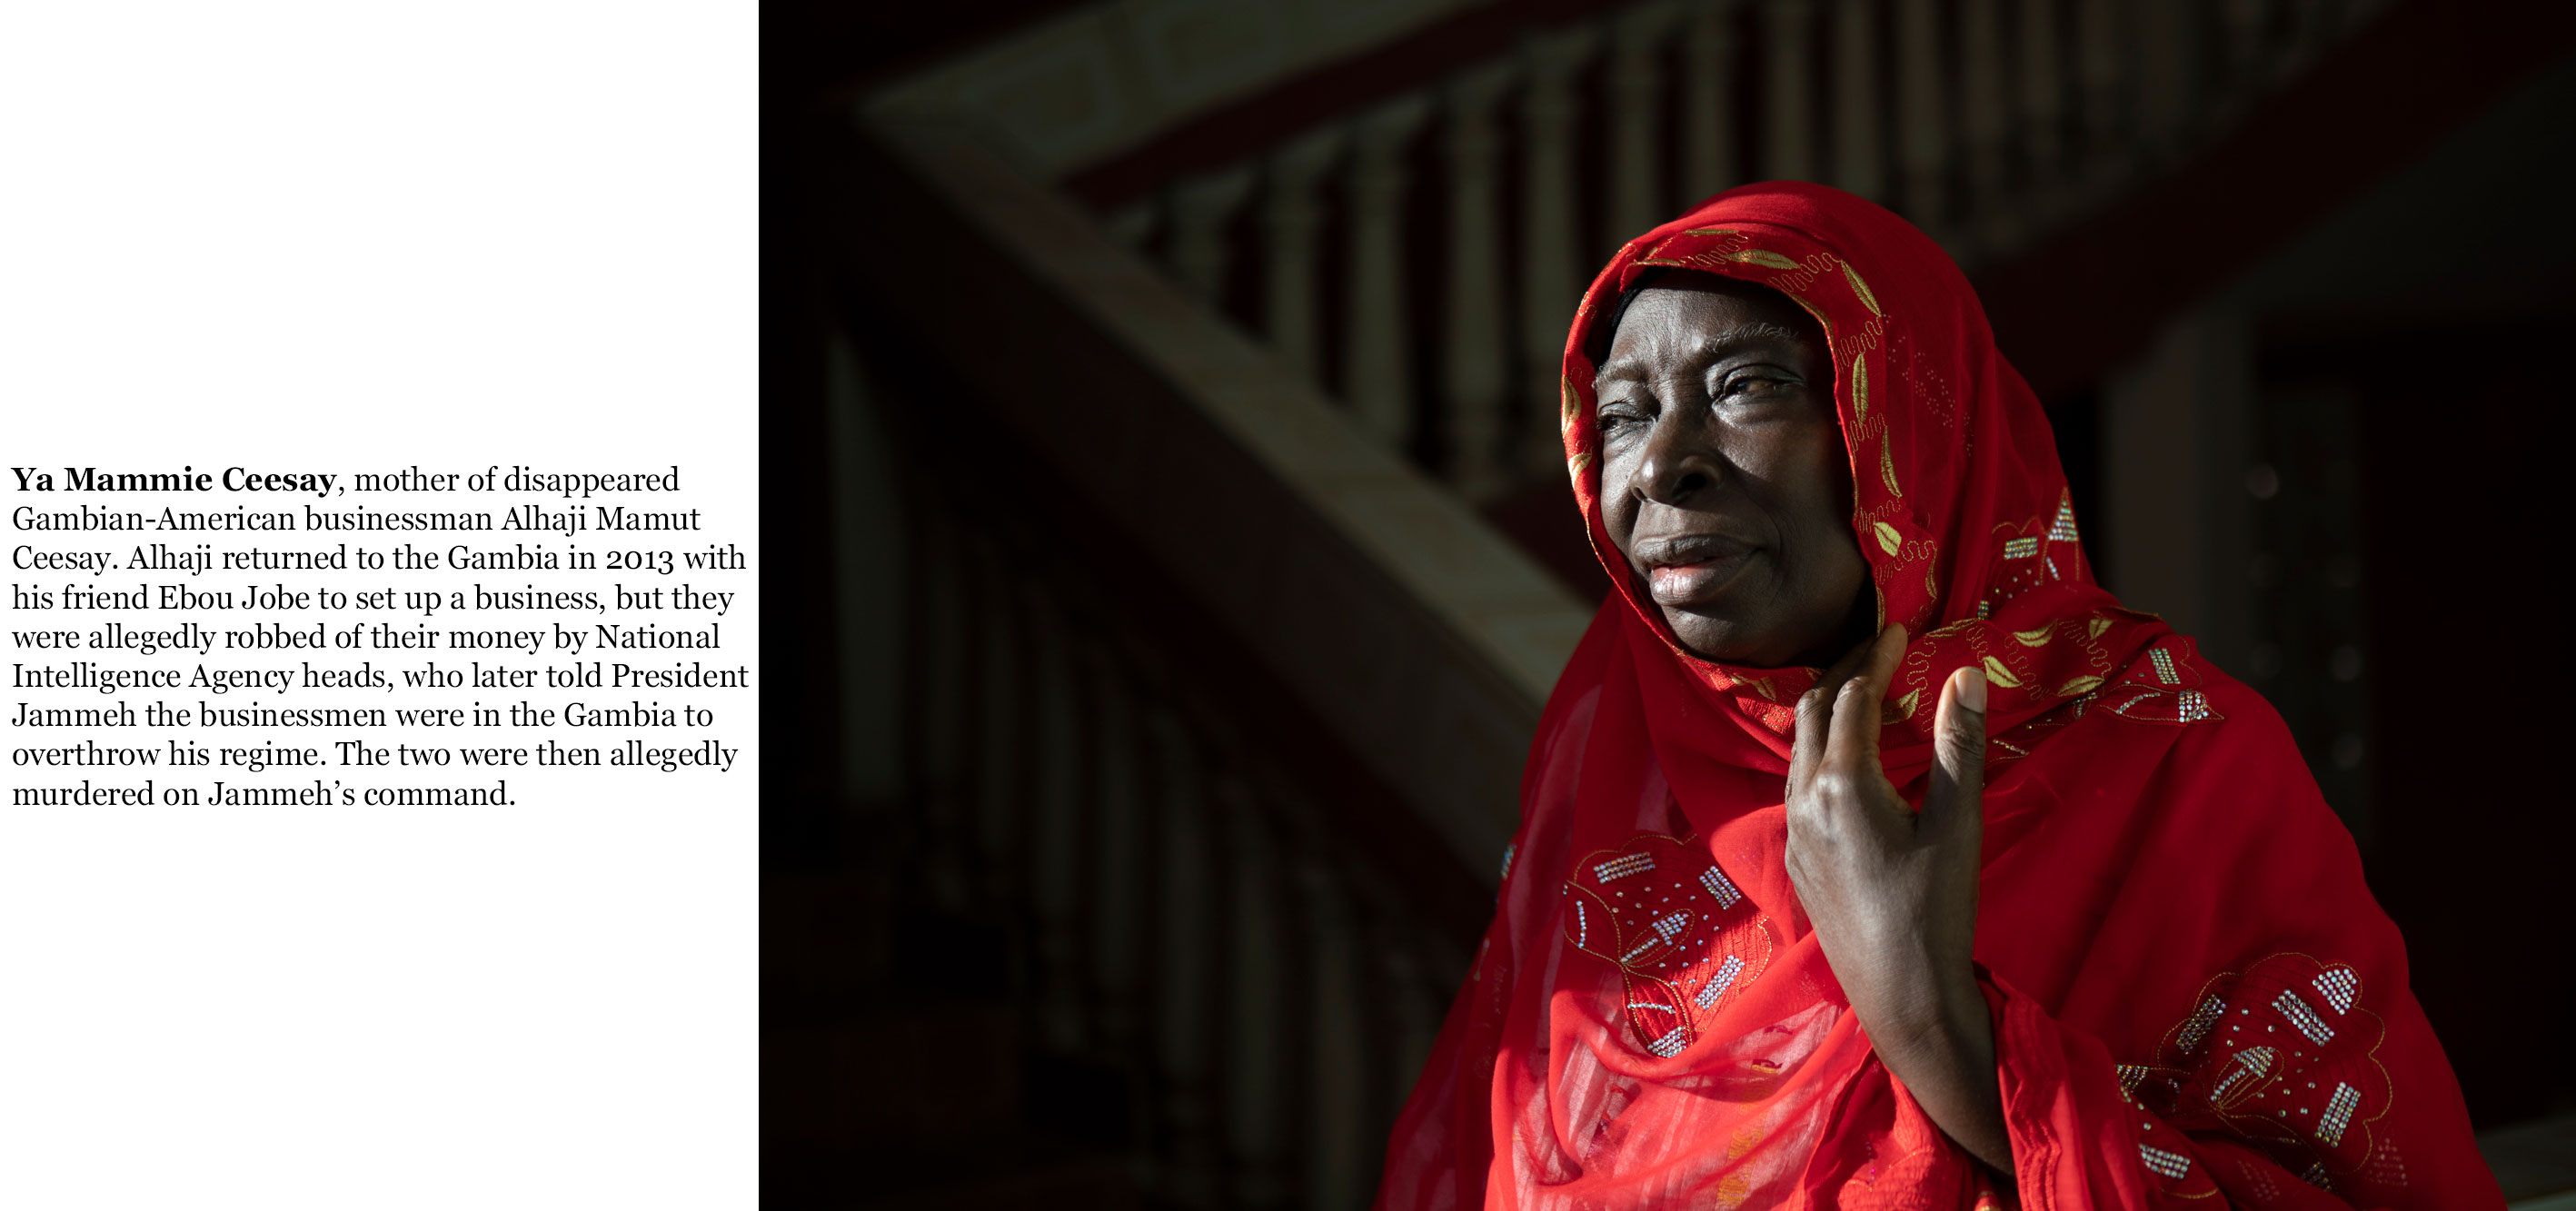 Gambia victims and resisters - Ya Mammie Ceesay, mother of murdered businessman Alajie Mamut Ceesay,  florio-1397_TEXT_FLAT_web